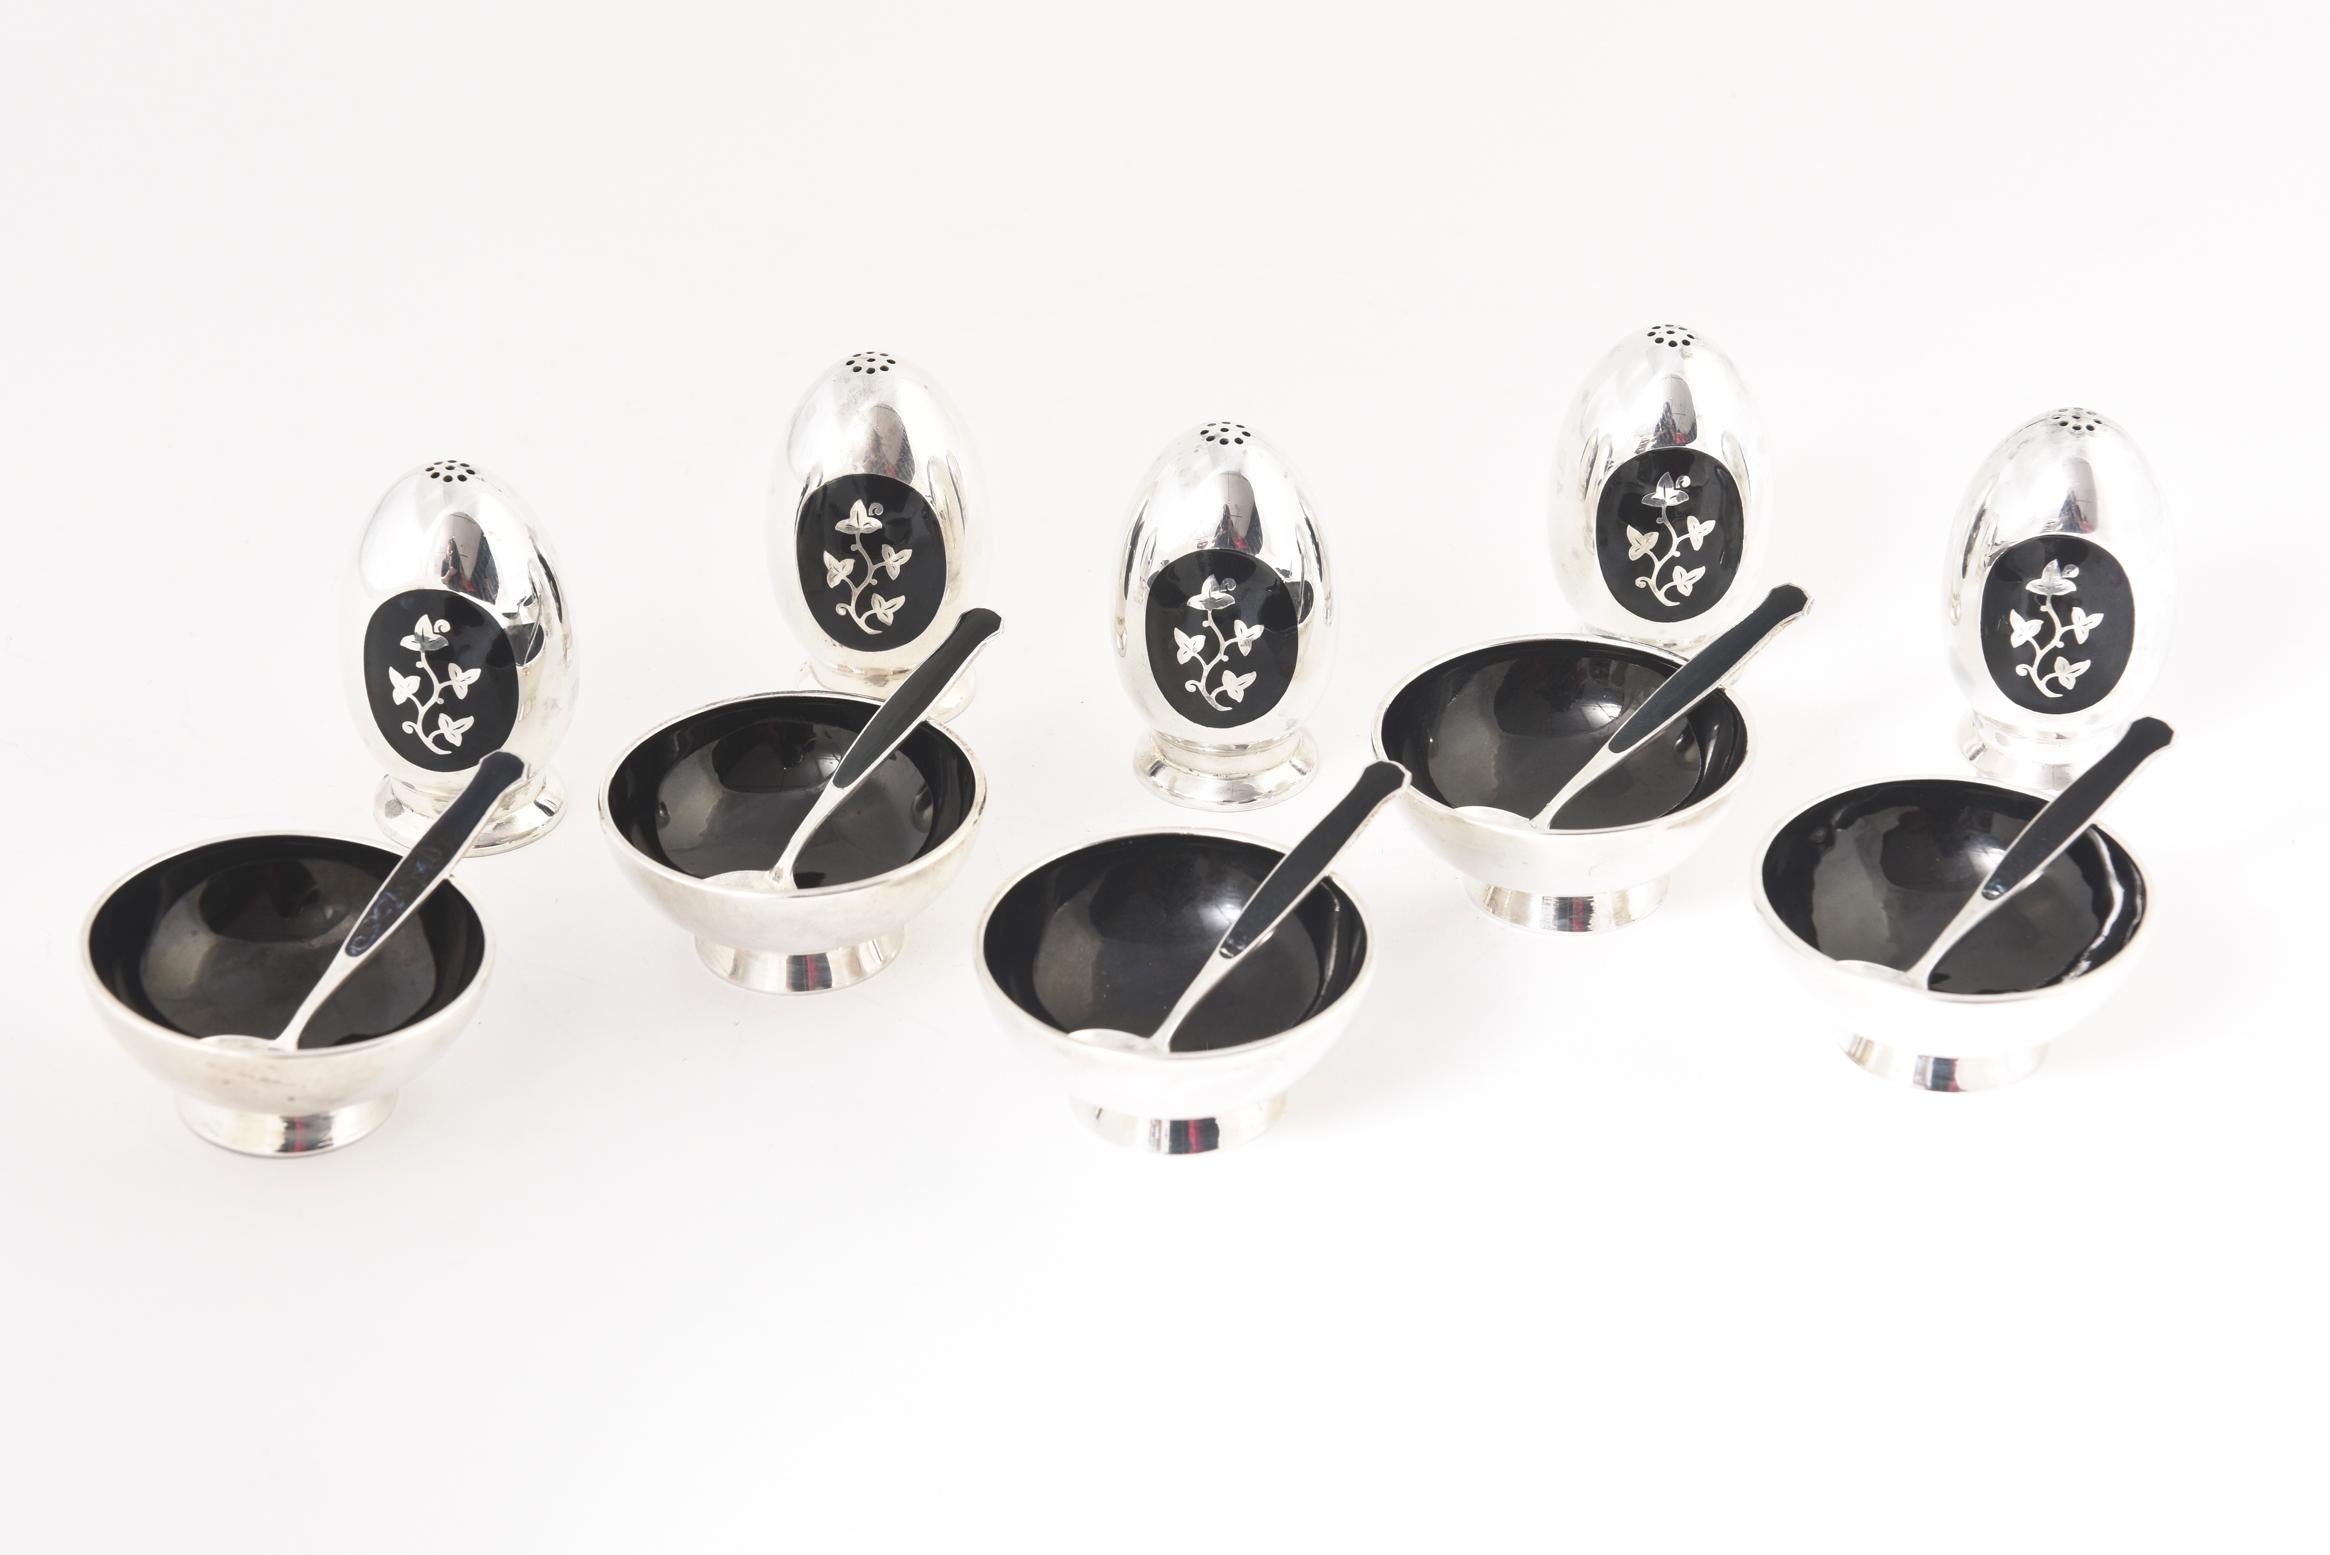 Elegant mid 20th century moderne sterling silver and black enamel salt and pepper sets by Danish designer Meka. There are 5 sets each has a pepper shaker, a salt bowl and a matching spoon. 

The bottom of one of the peppers is missing. You could